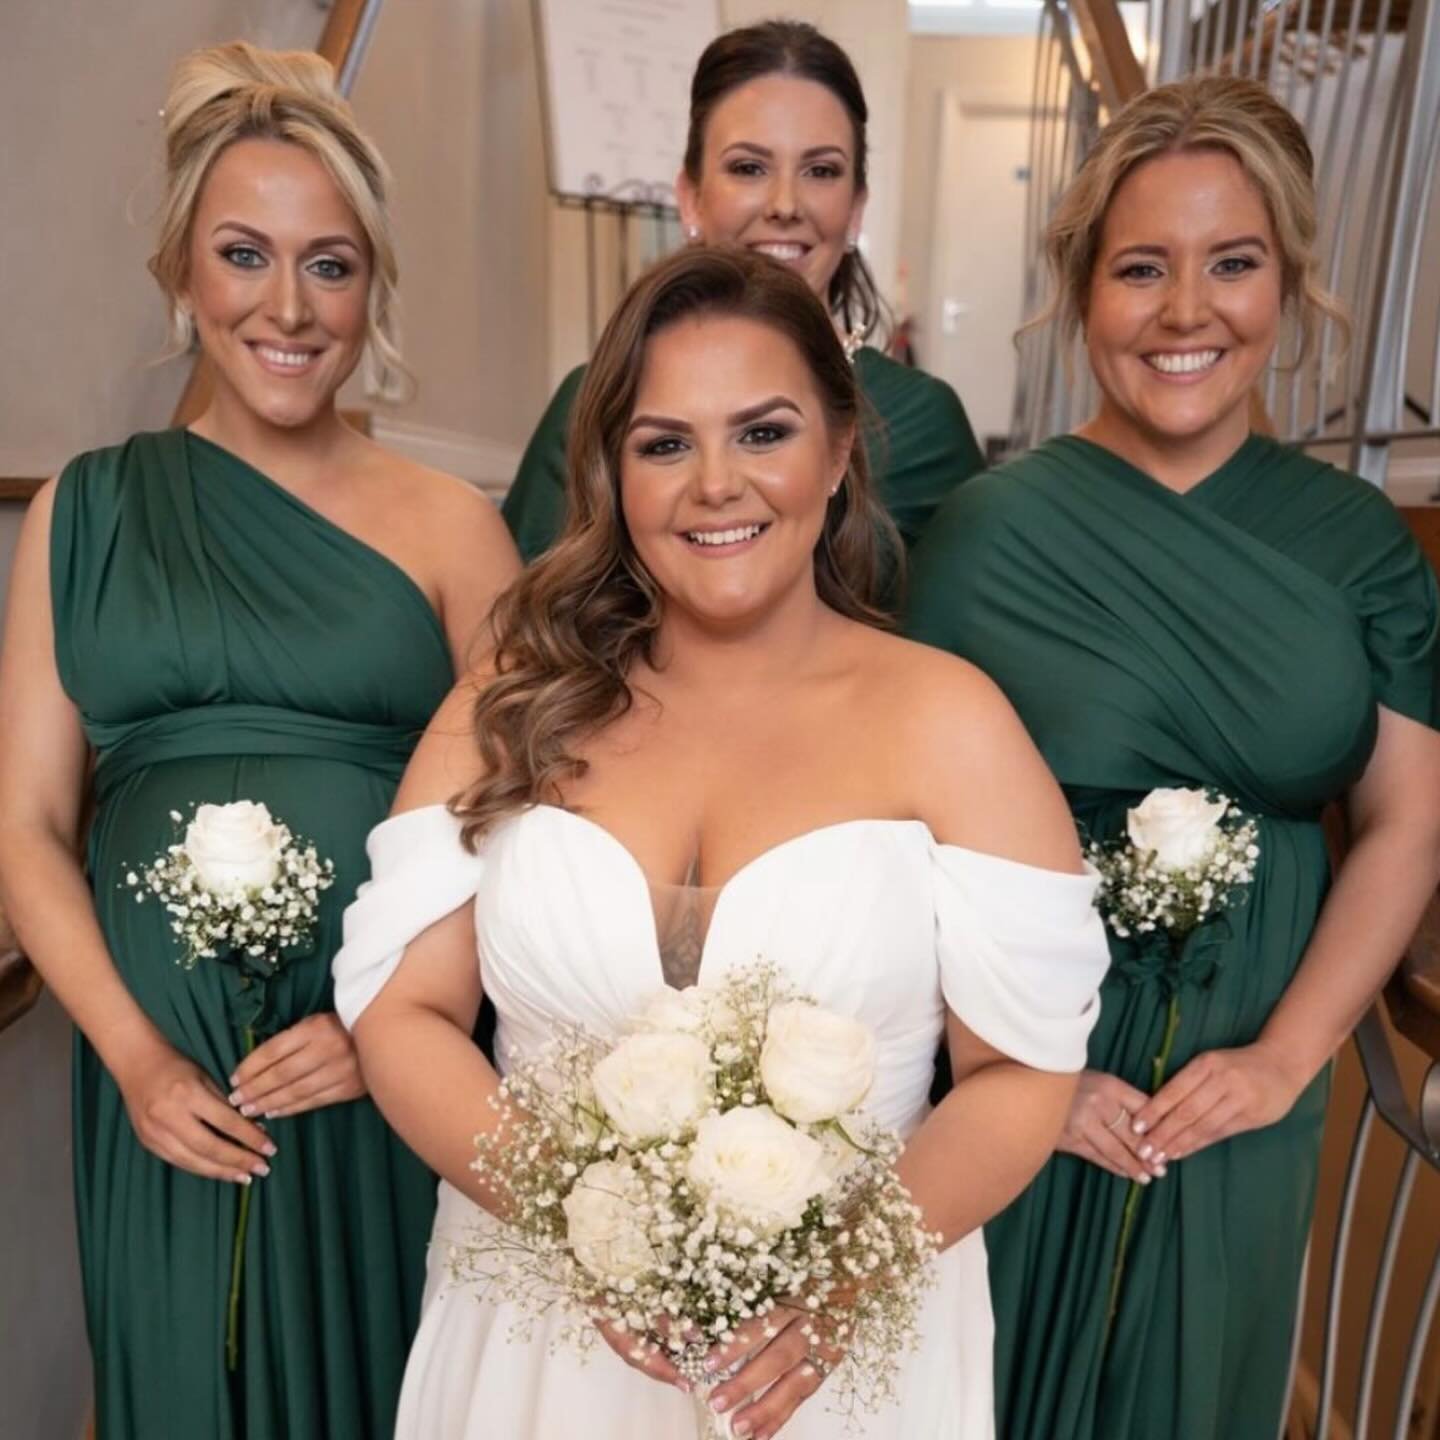 So not over these gorgeous wedding pics - a stunning bridal party all such similar yet different looks to suit each person flawless and stunning!

For all Bridal enquiries contact me on the below 

&bull;&bull;&bull;&bull;&bull;&bull;&bull;&bull;&bul